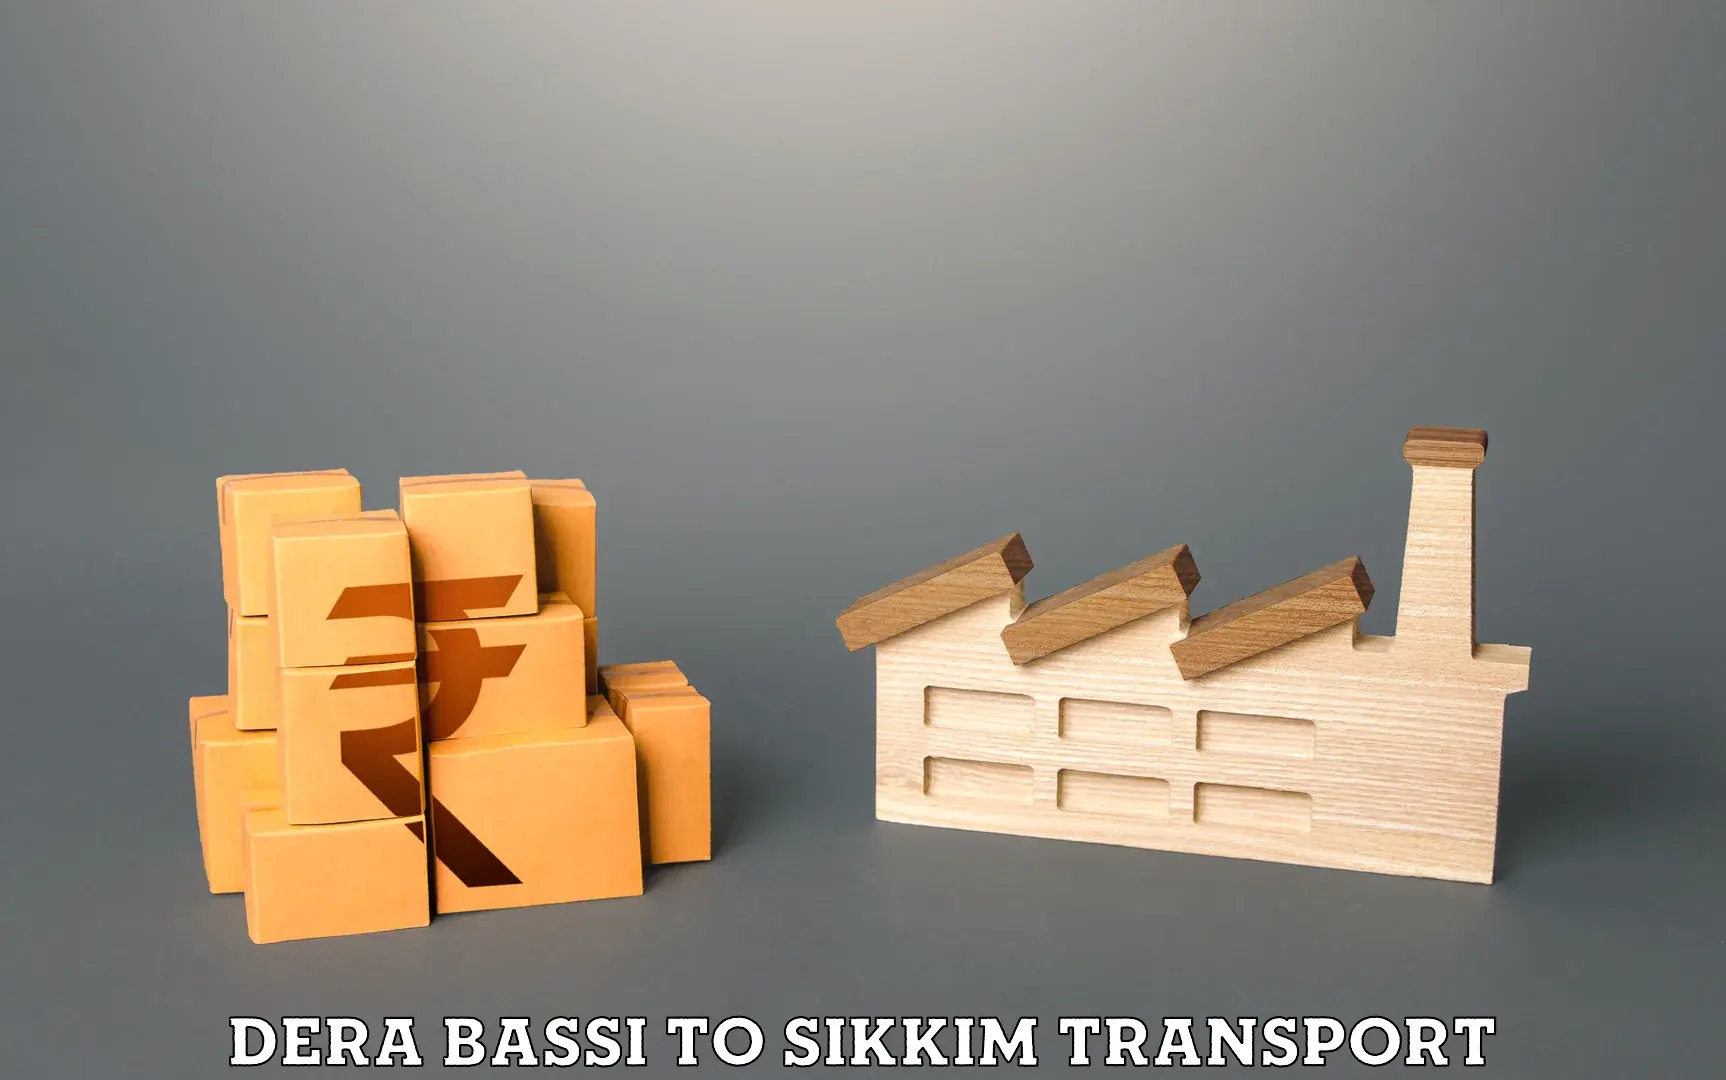 Nearby transport service Dera Bassi to South Sikkim